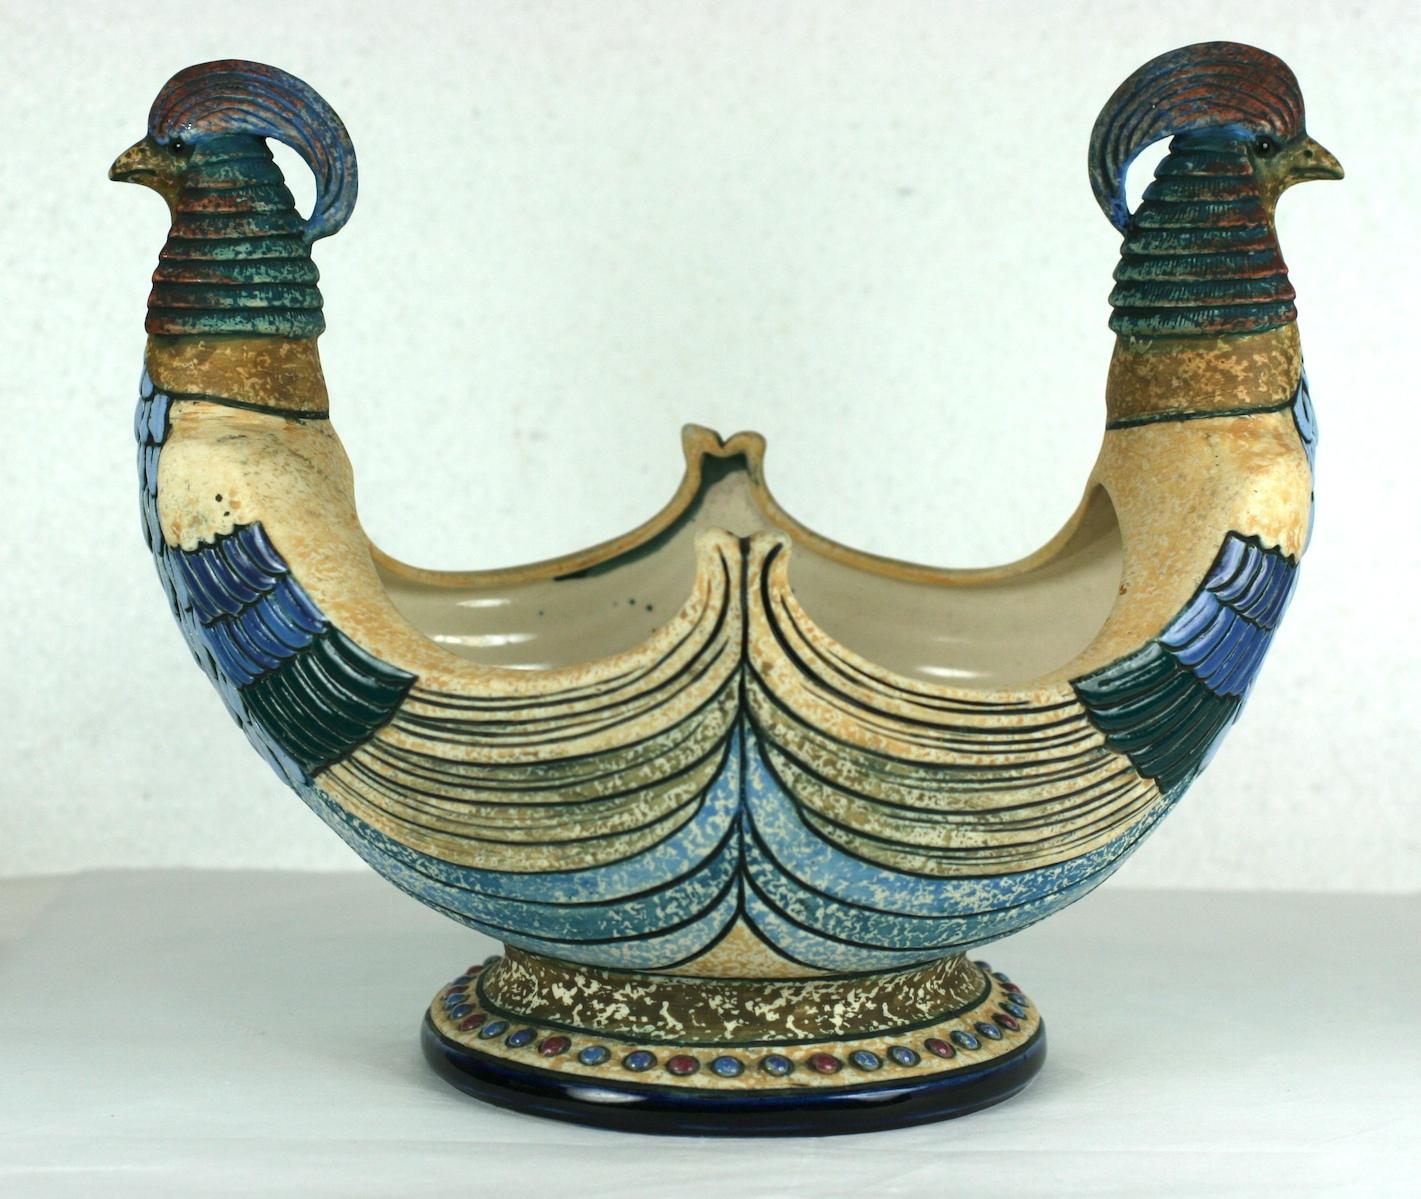 Gorgeous Amphora double headed pheasant bowl from the Arts & Crafts era featuring a pheasant head on each end of the bowl. Created in the Teplitz-Turn area of the Czech Republic this wonderful piece carries the Amphora Works Riessner mark dating it